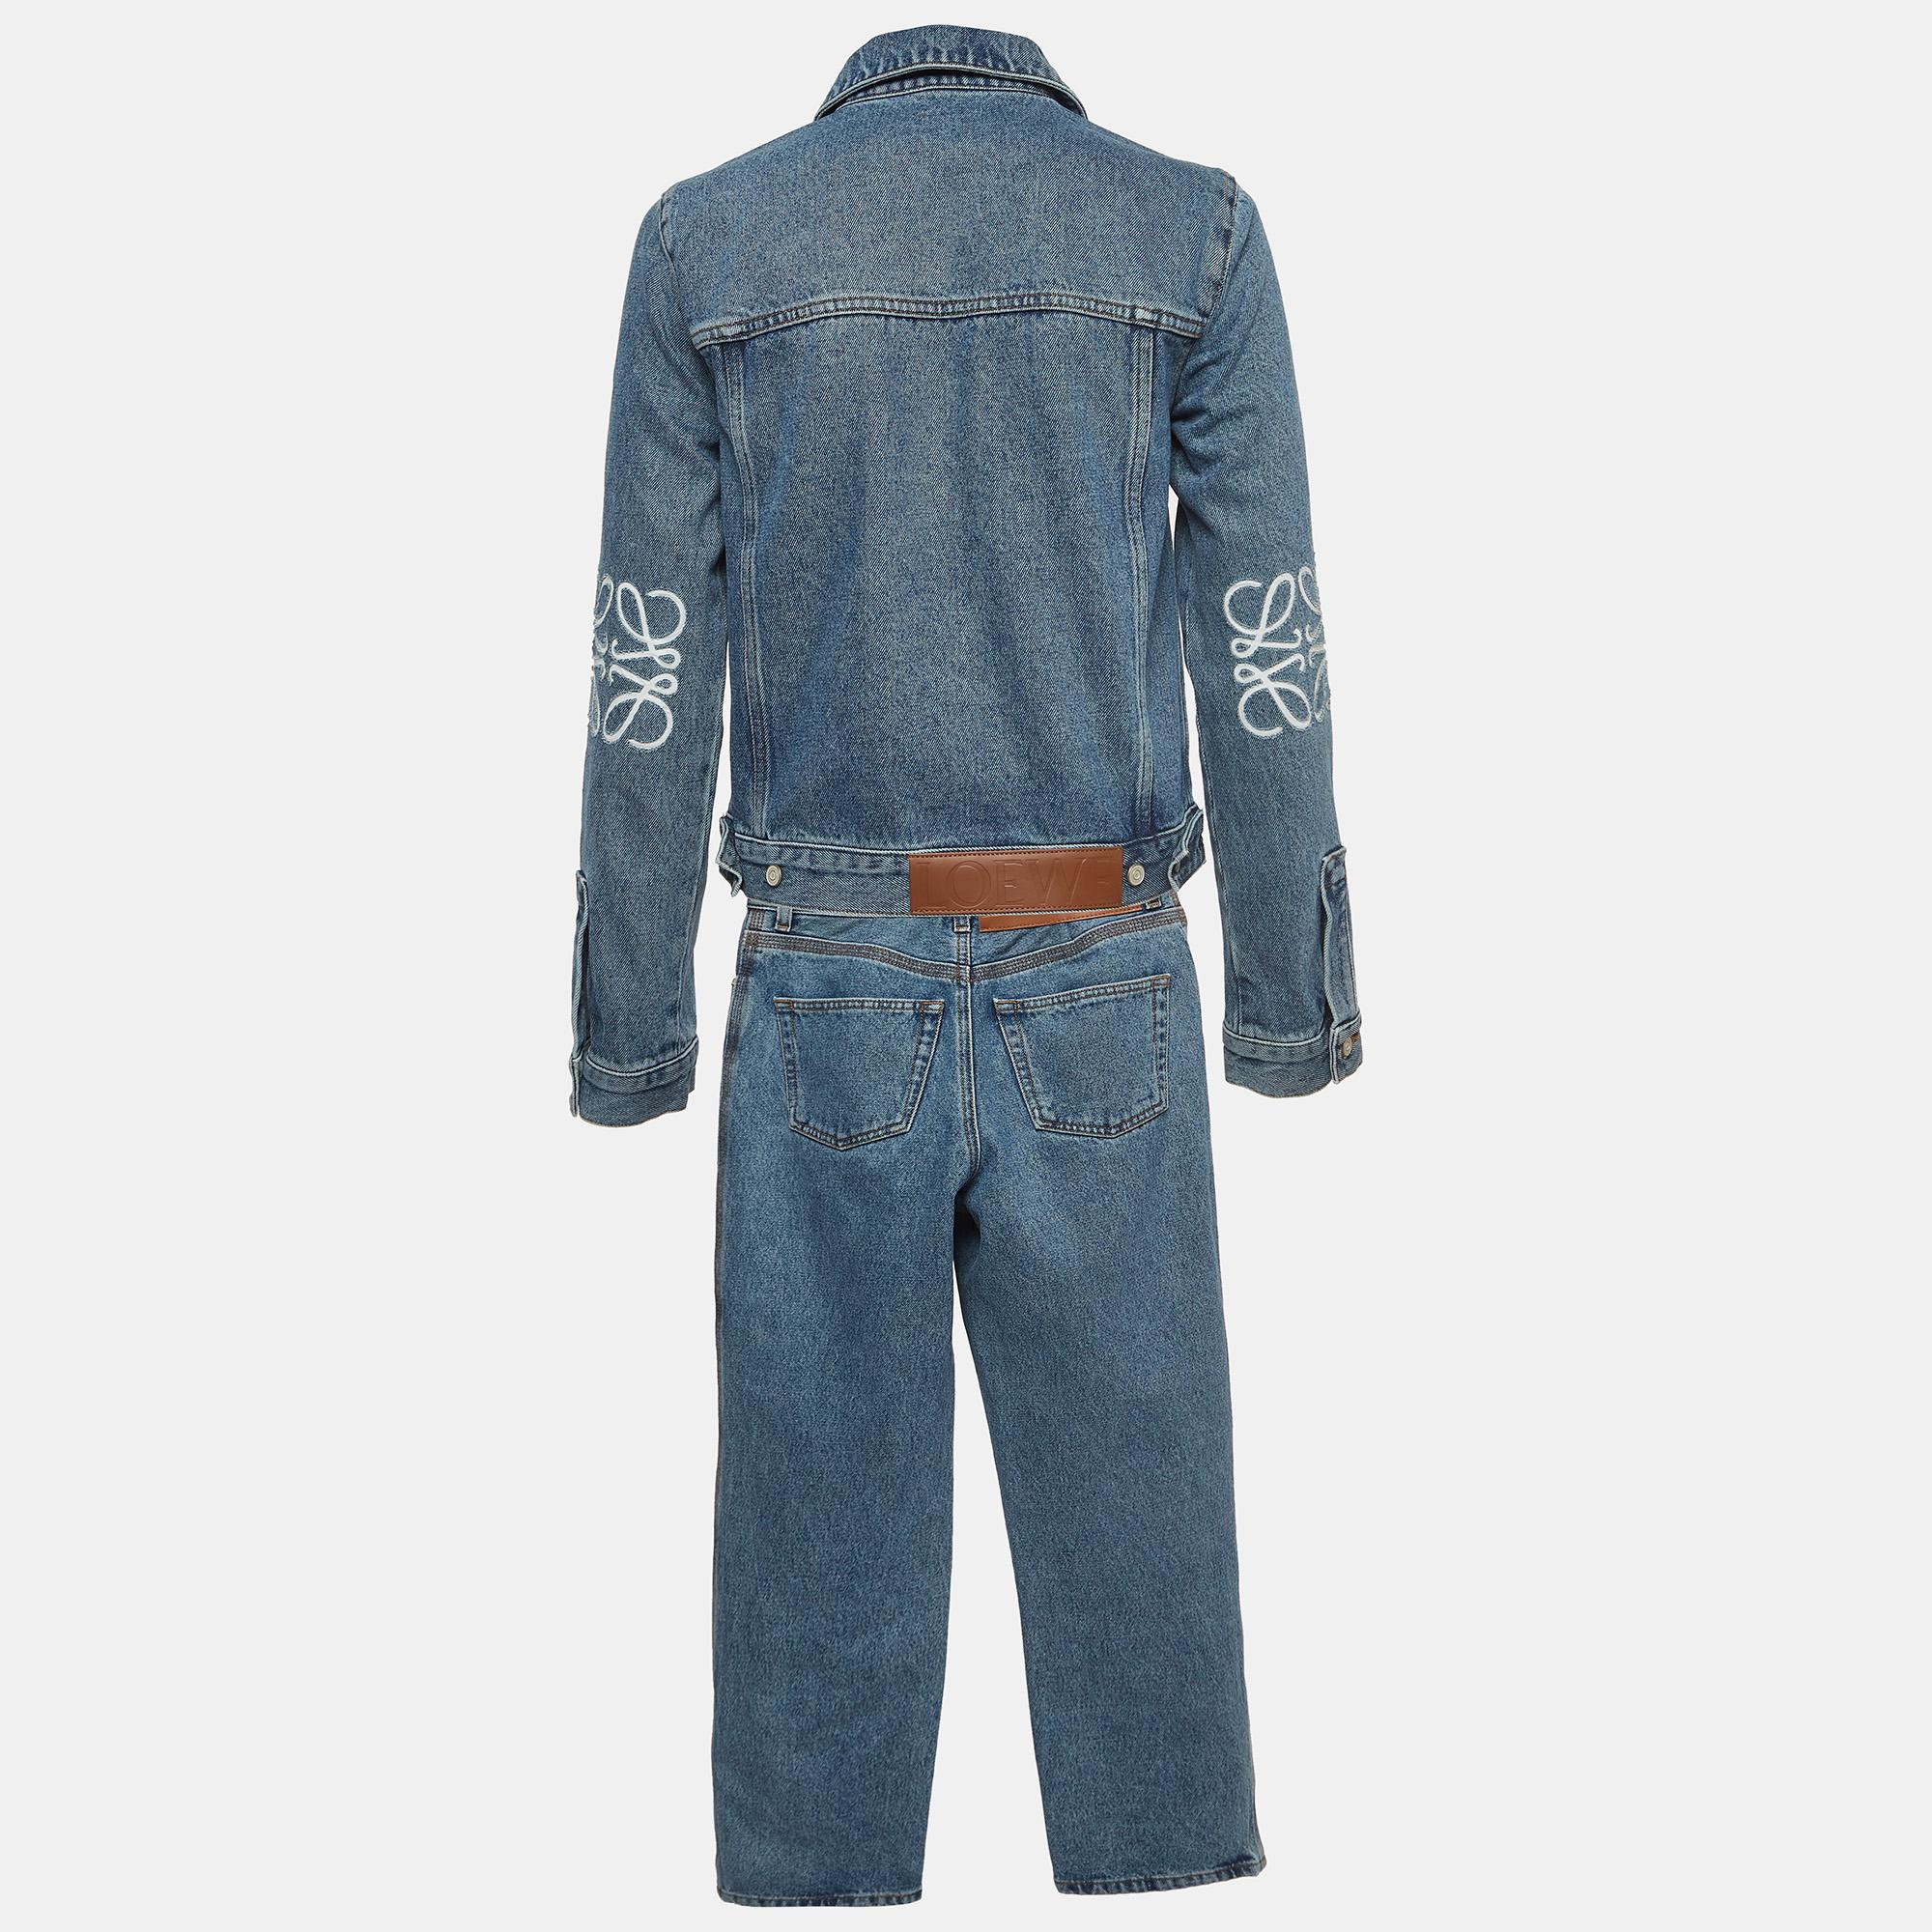 Loewe shows us how to nail the denim-on-denim look the right way. This set comes with a jacket and a matching pair of jeans. The brand logo adds the right finish. Style the set with a pair of sneakers, loafers, or heels.

